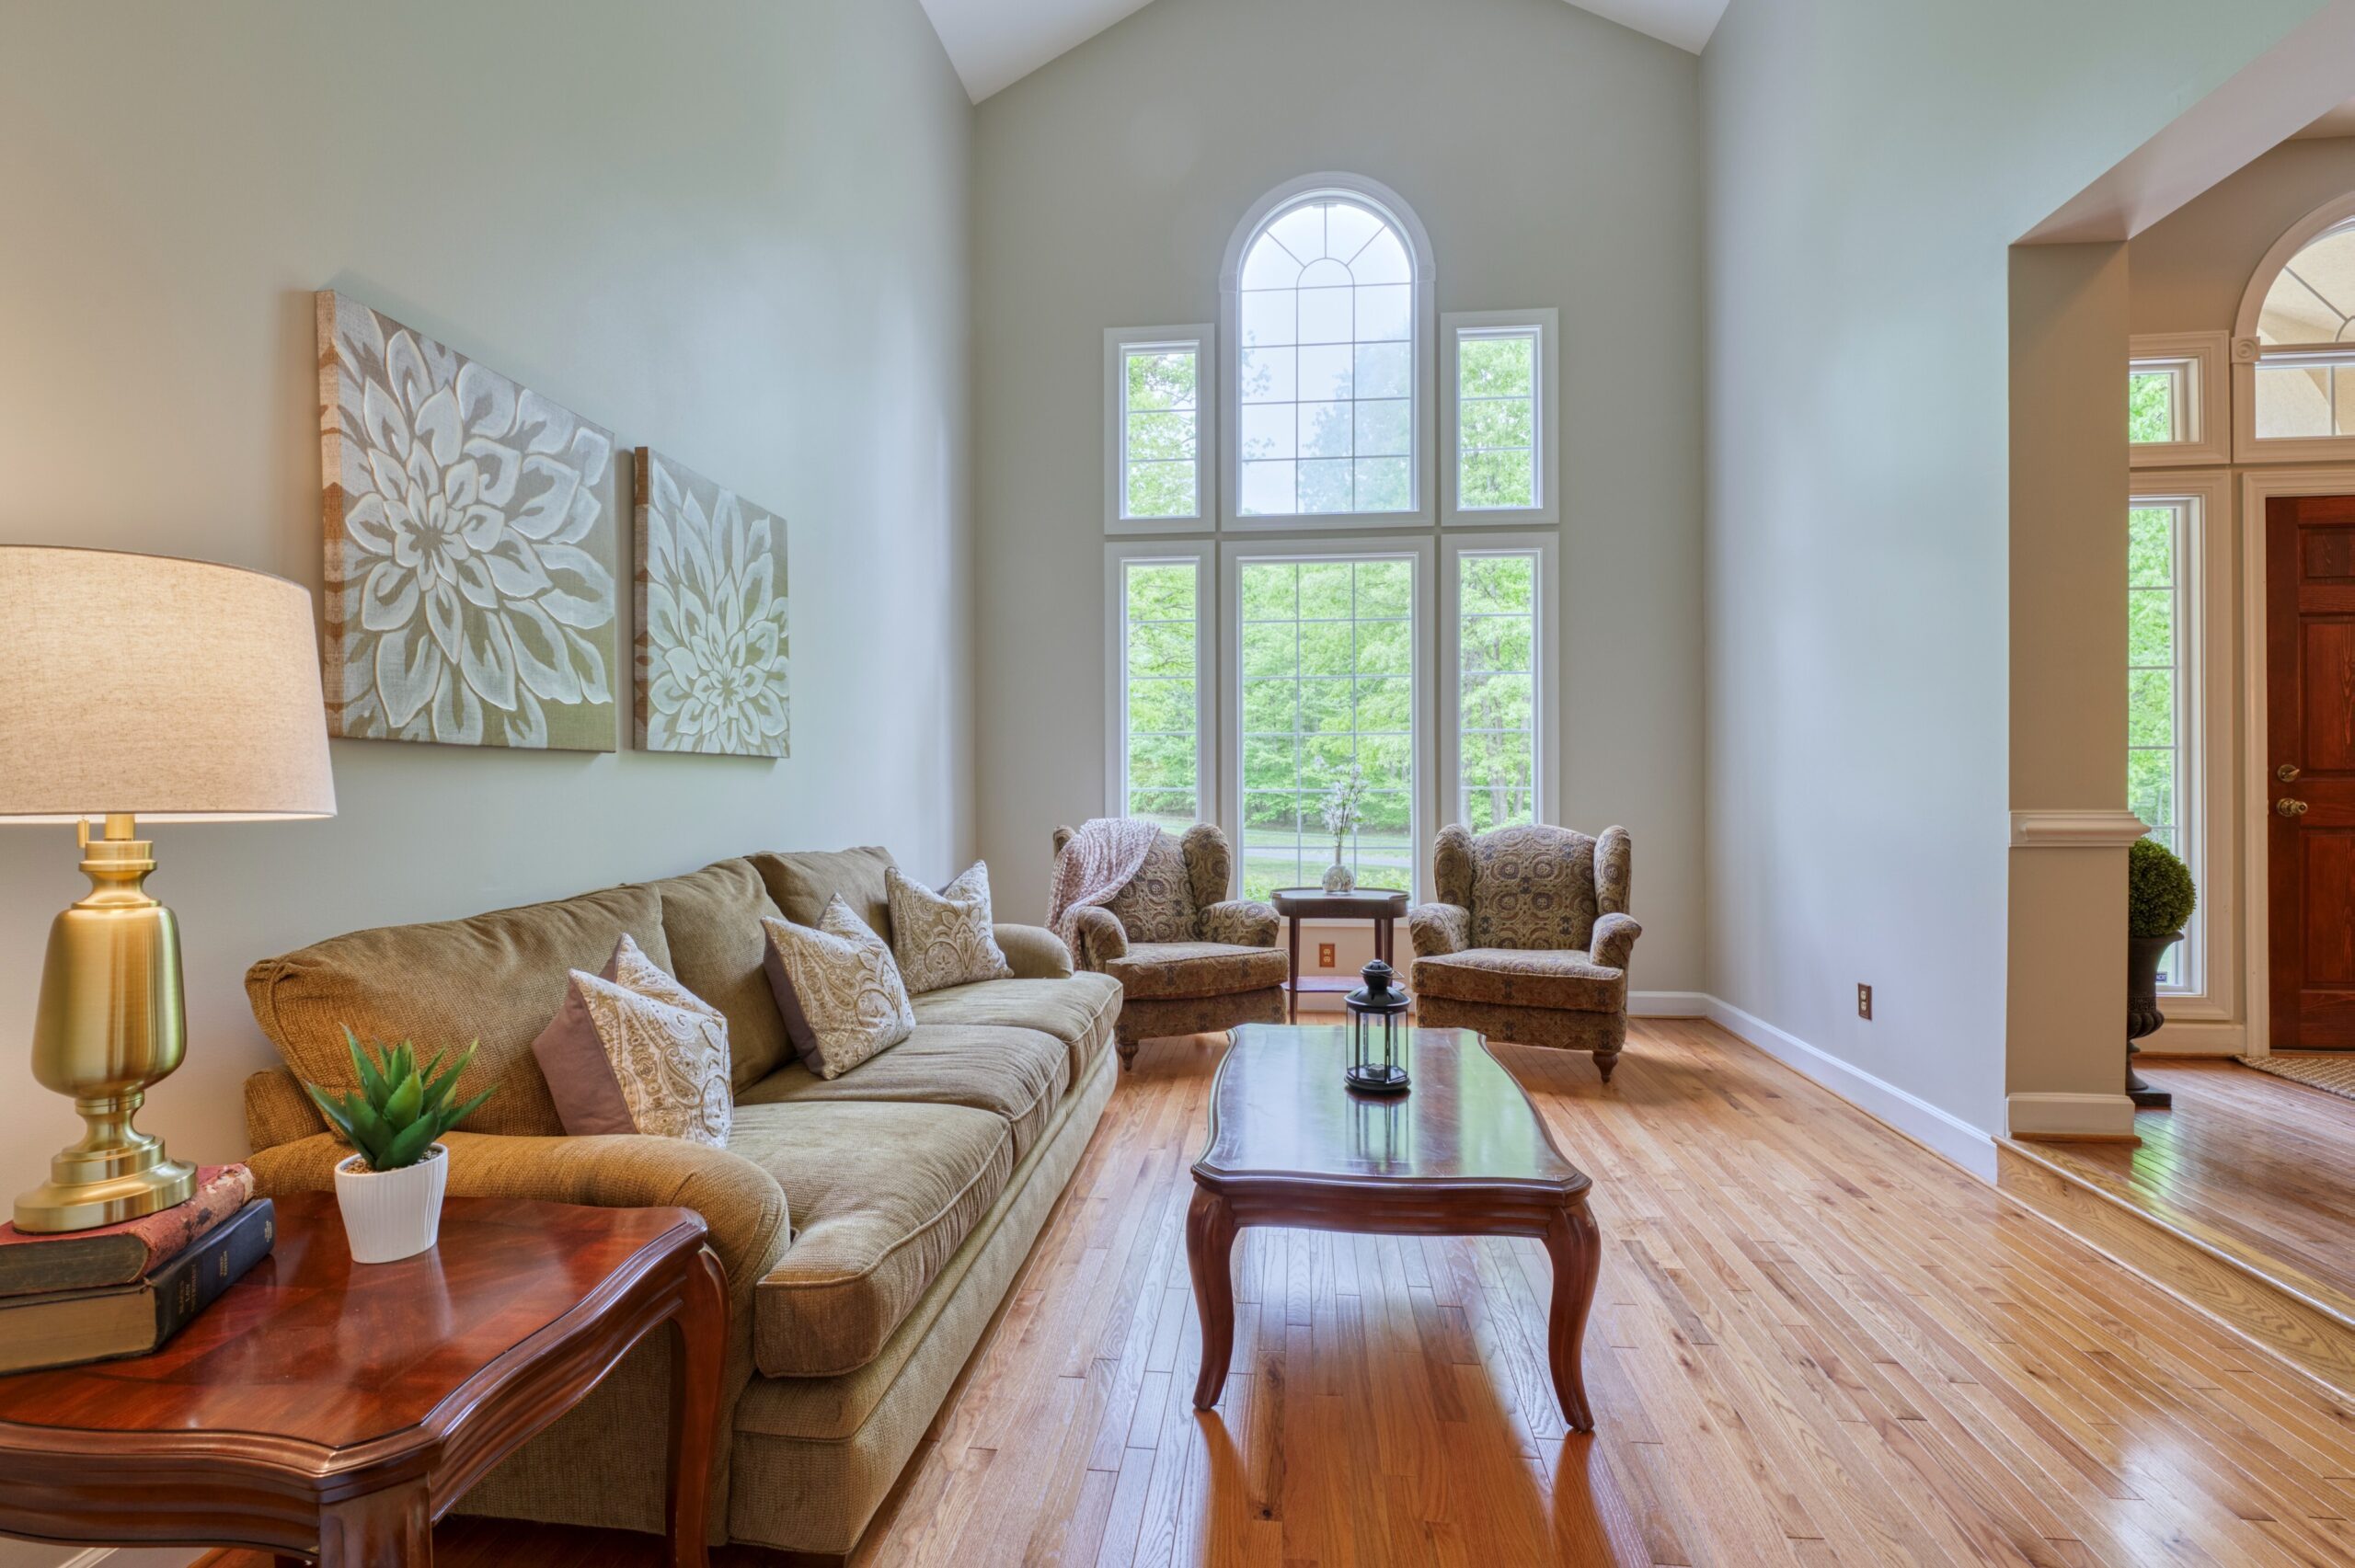 Professional interior photo of 13700 Holly Forest Dr - showing the formal living room with 1.5 story arched windows and hardwood floors